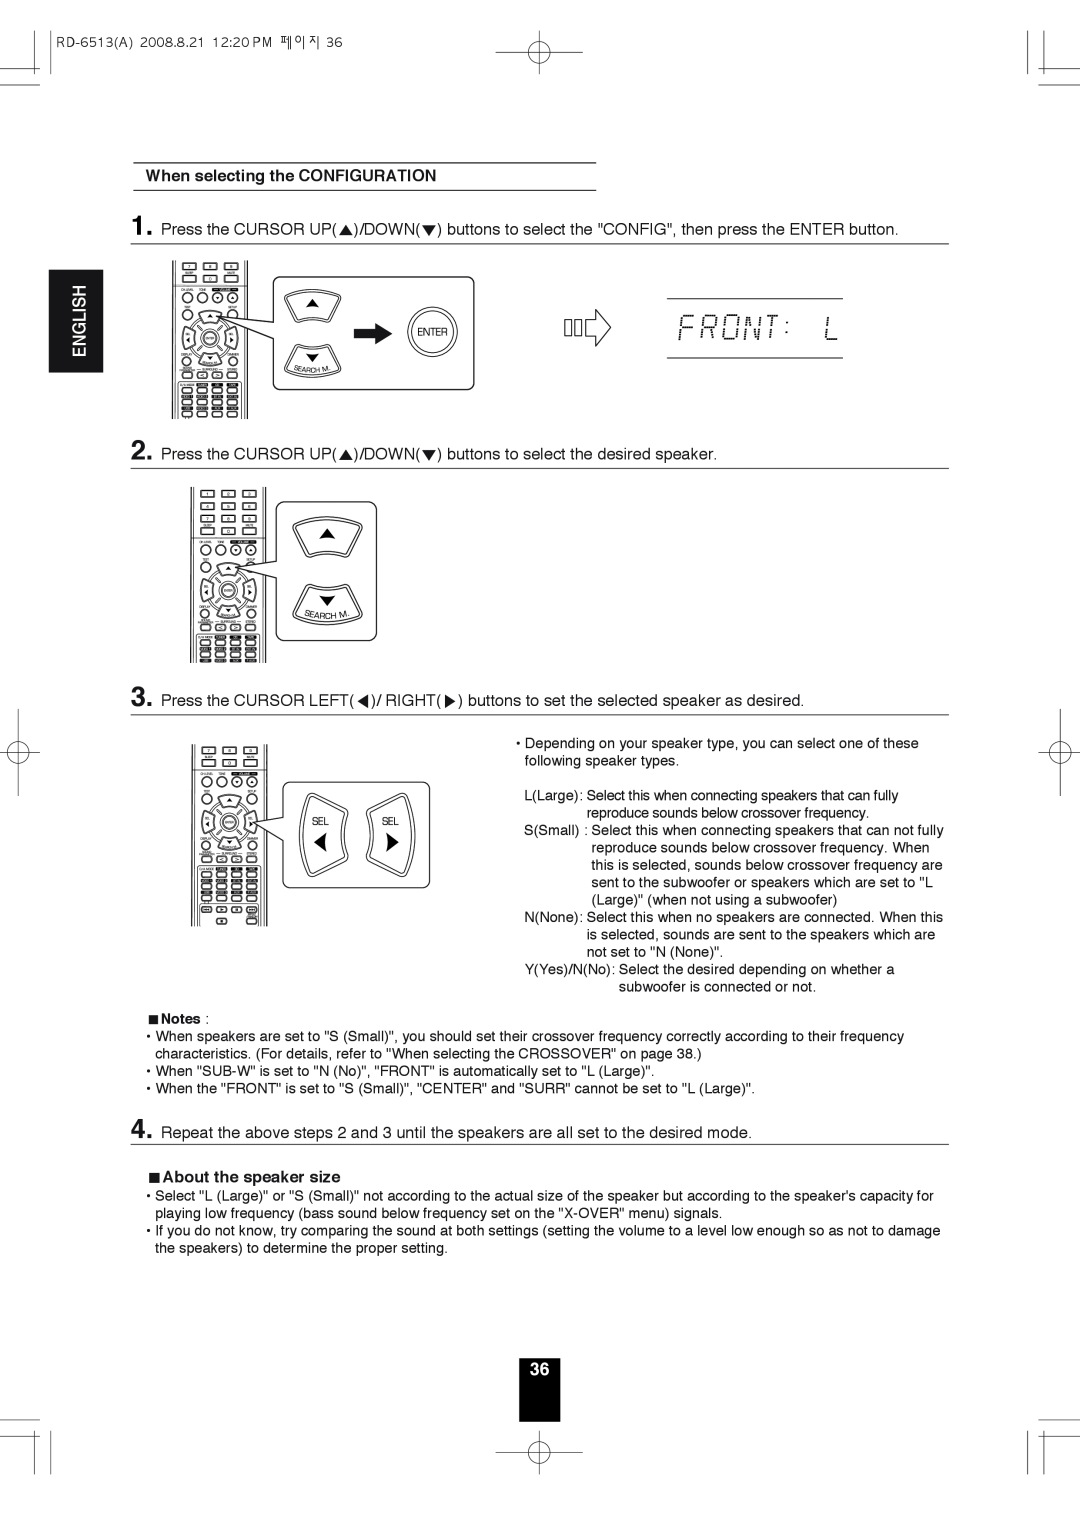 Sherwood RD-6513 manual When selecting the CONFIGURATION, About the speaker size, English 